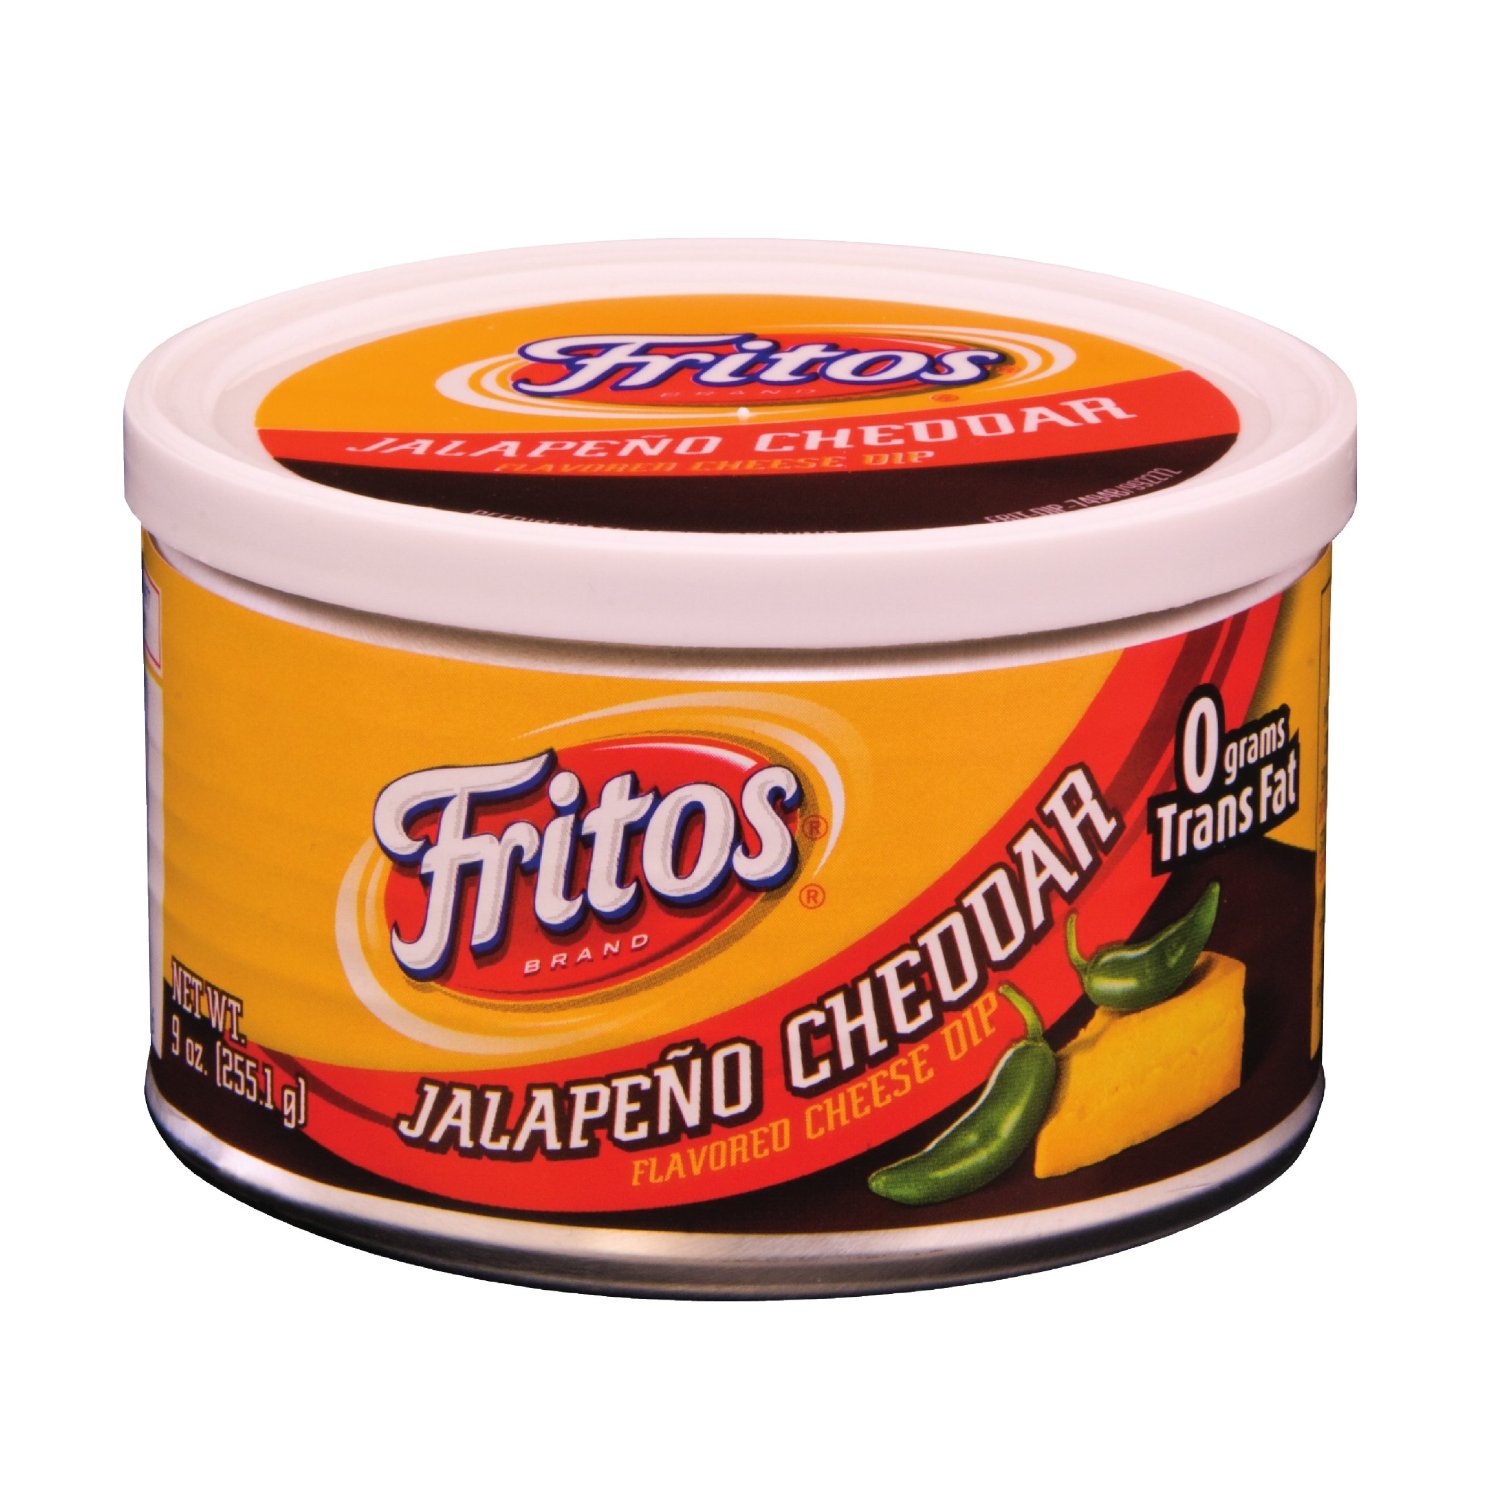 Frito Lay - Under $10 / Snack Foods / Grocery ...